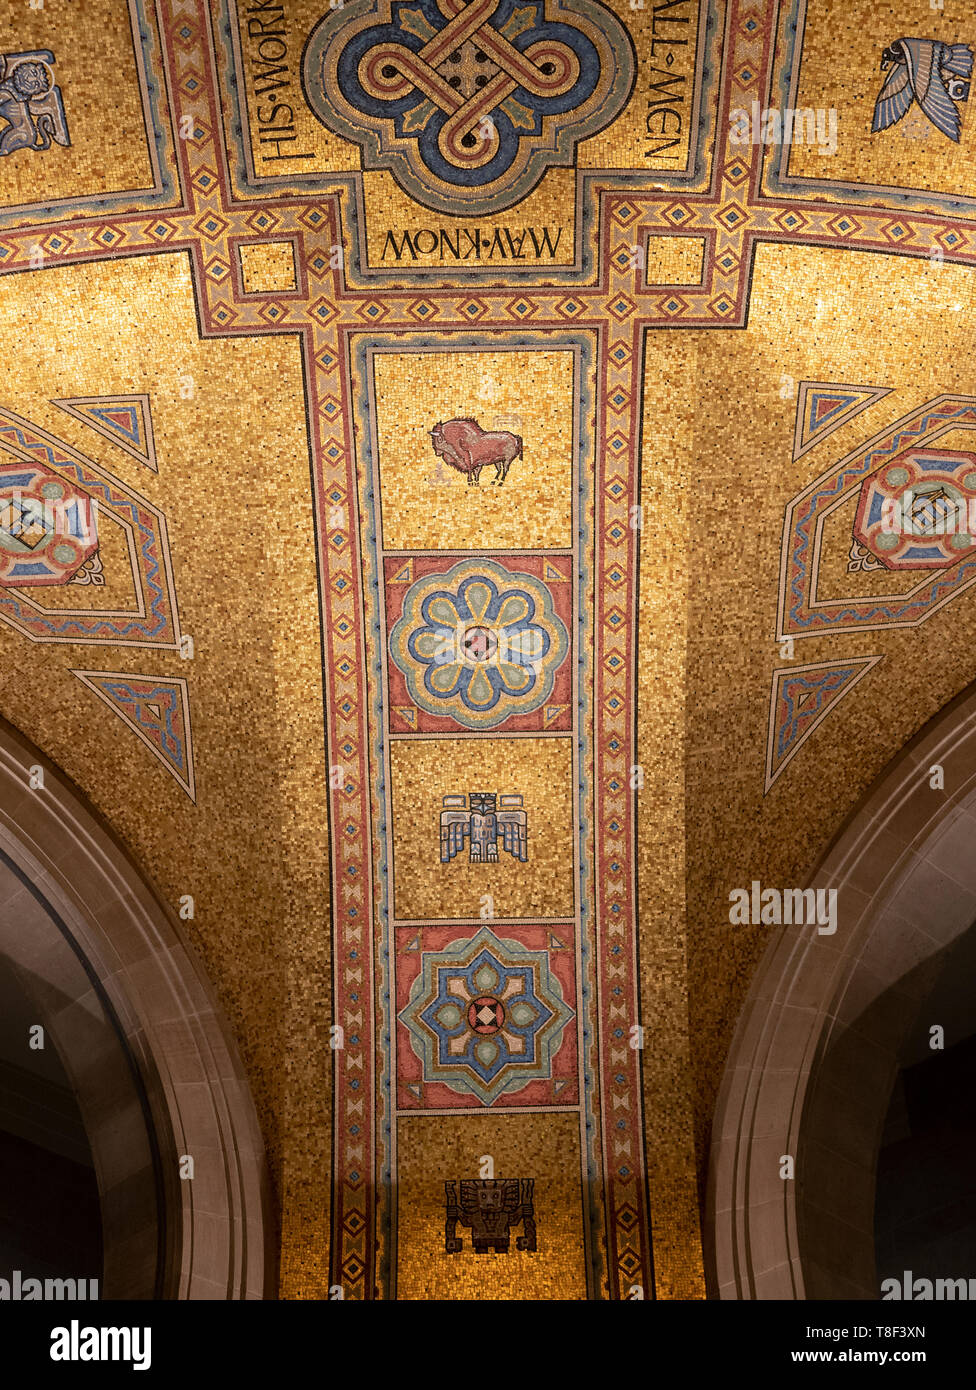 Royal Ontario Museum’s ceremonial entrance hall features one of the Museum’s most magnificent architectural treasures—a spectacular mosaic dome. Stock Photo